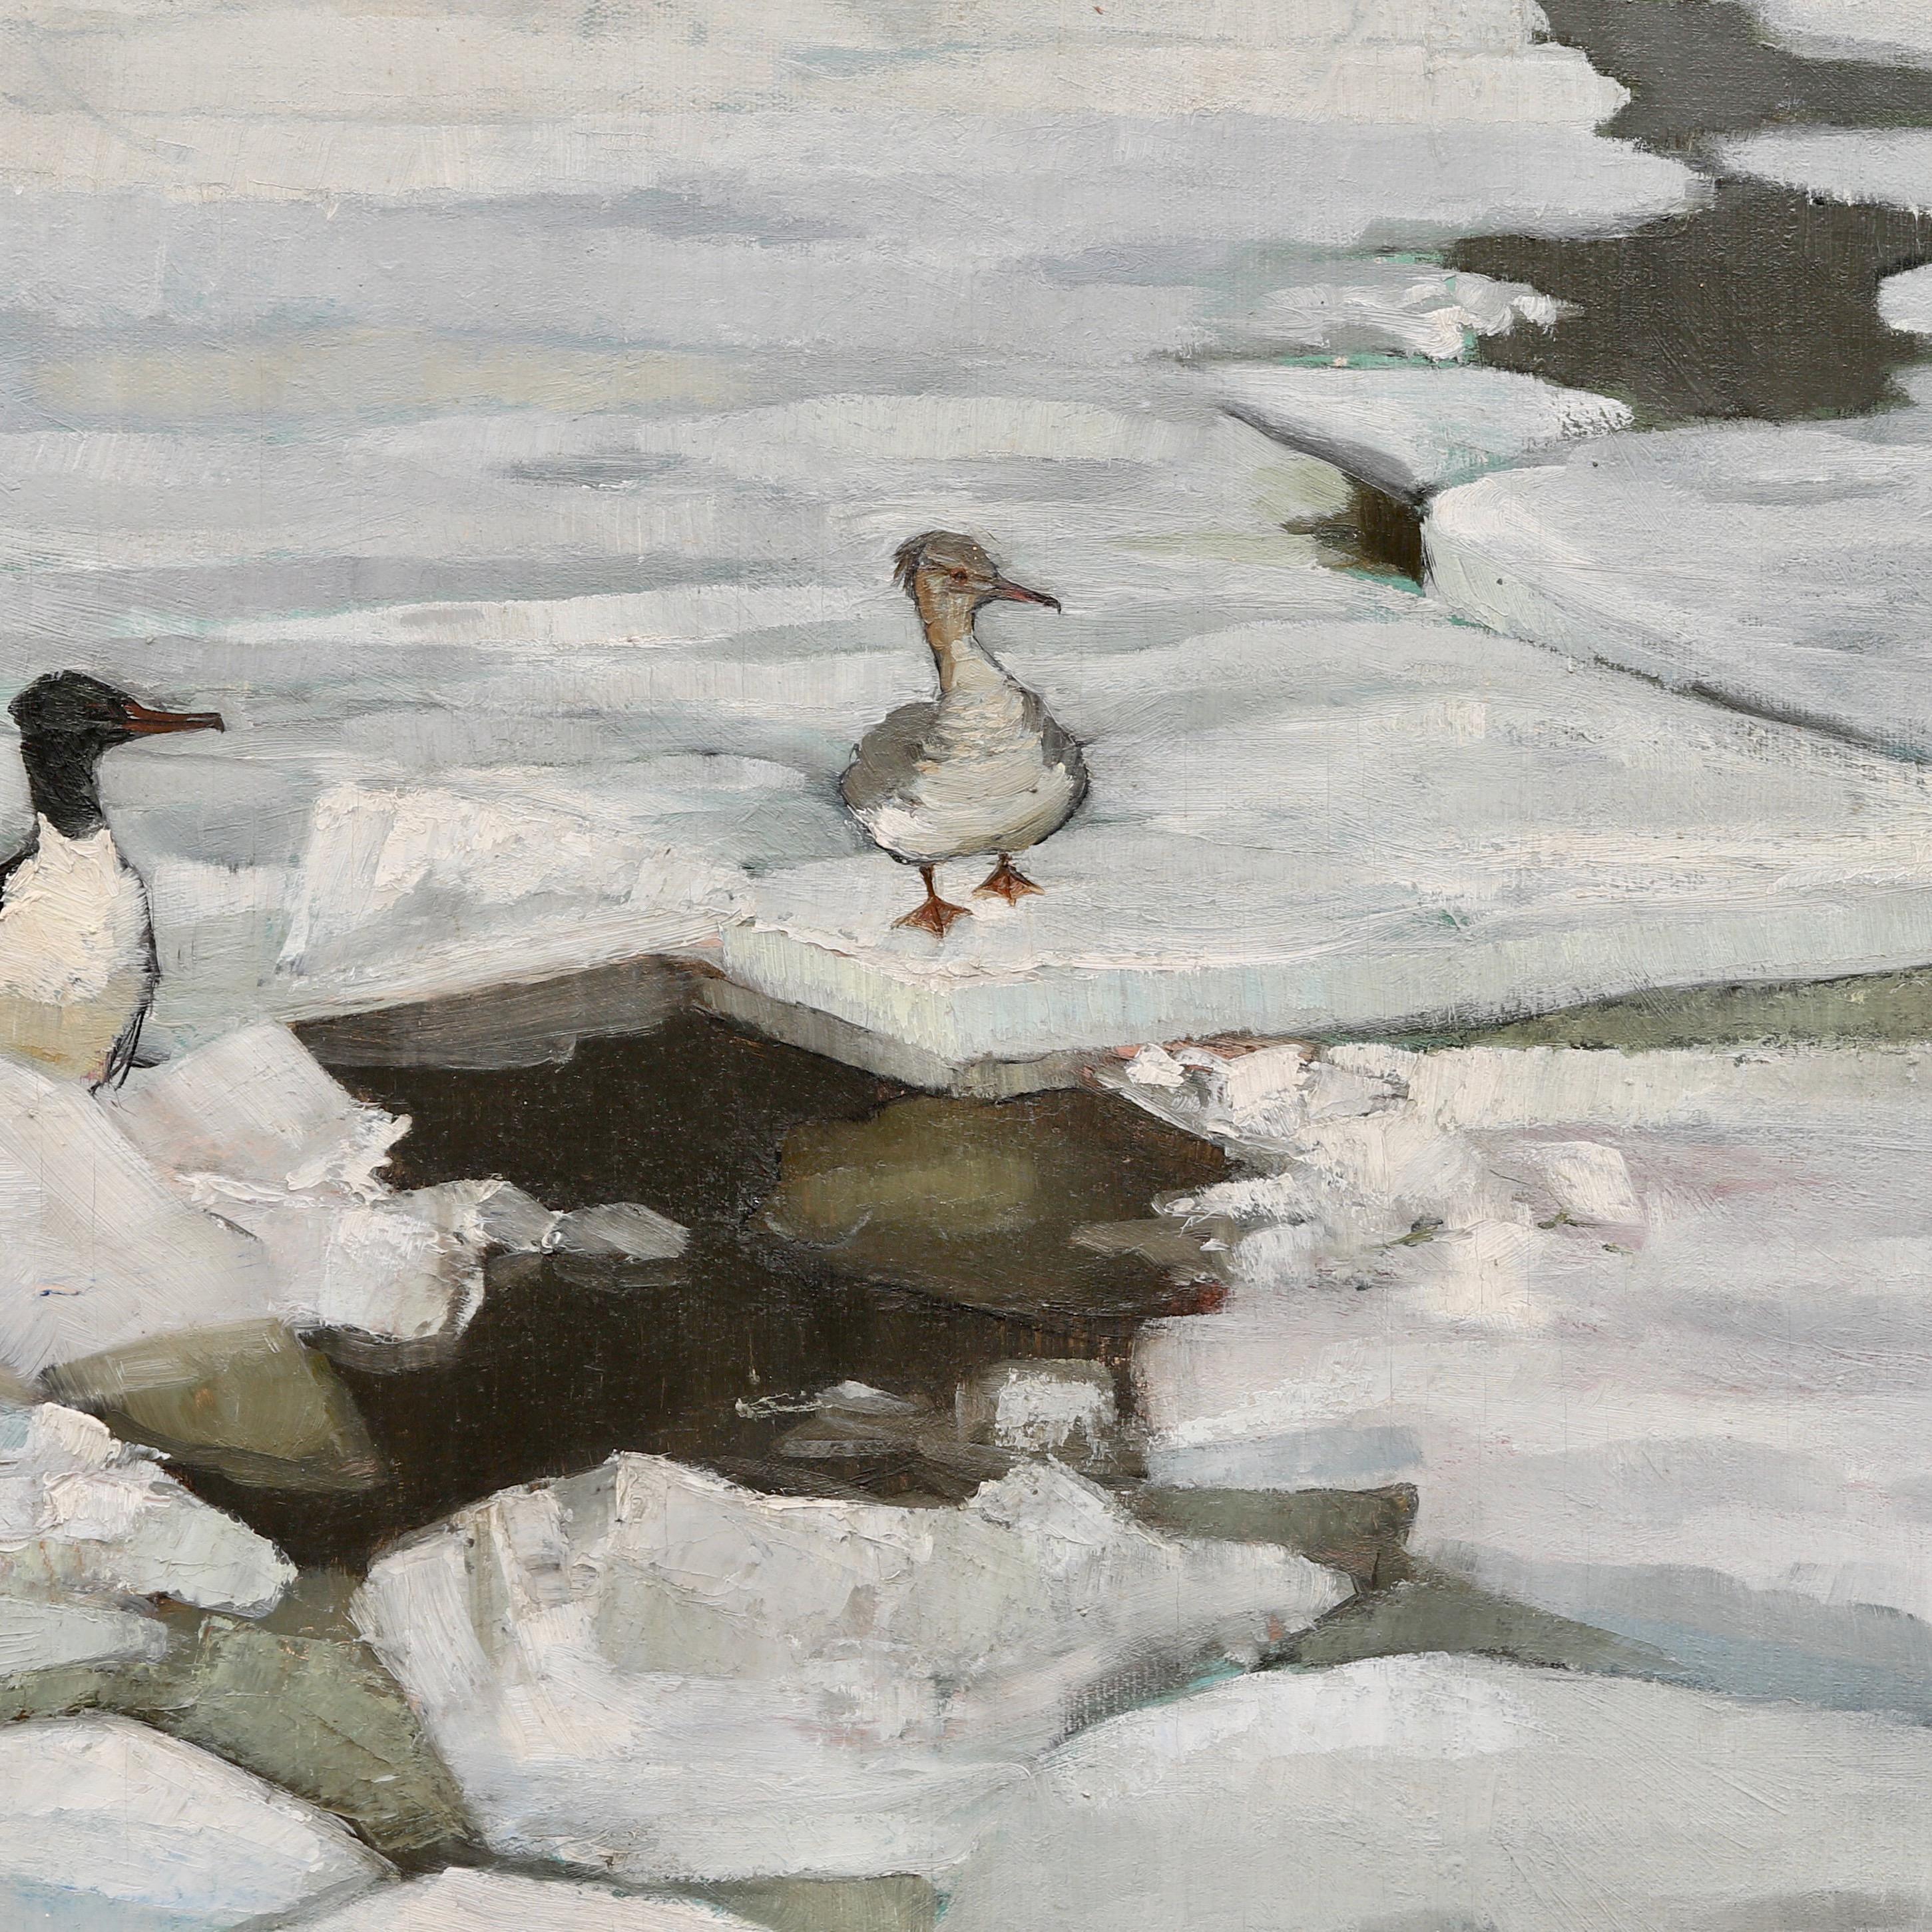 Goosander Birds On Ice Floes. Oil on Canvas 1918 - Naturalistic Painting by Christian Berg